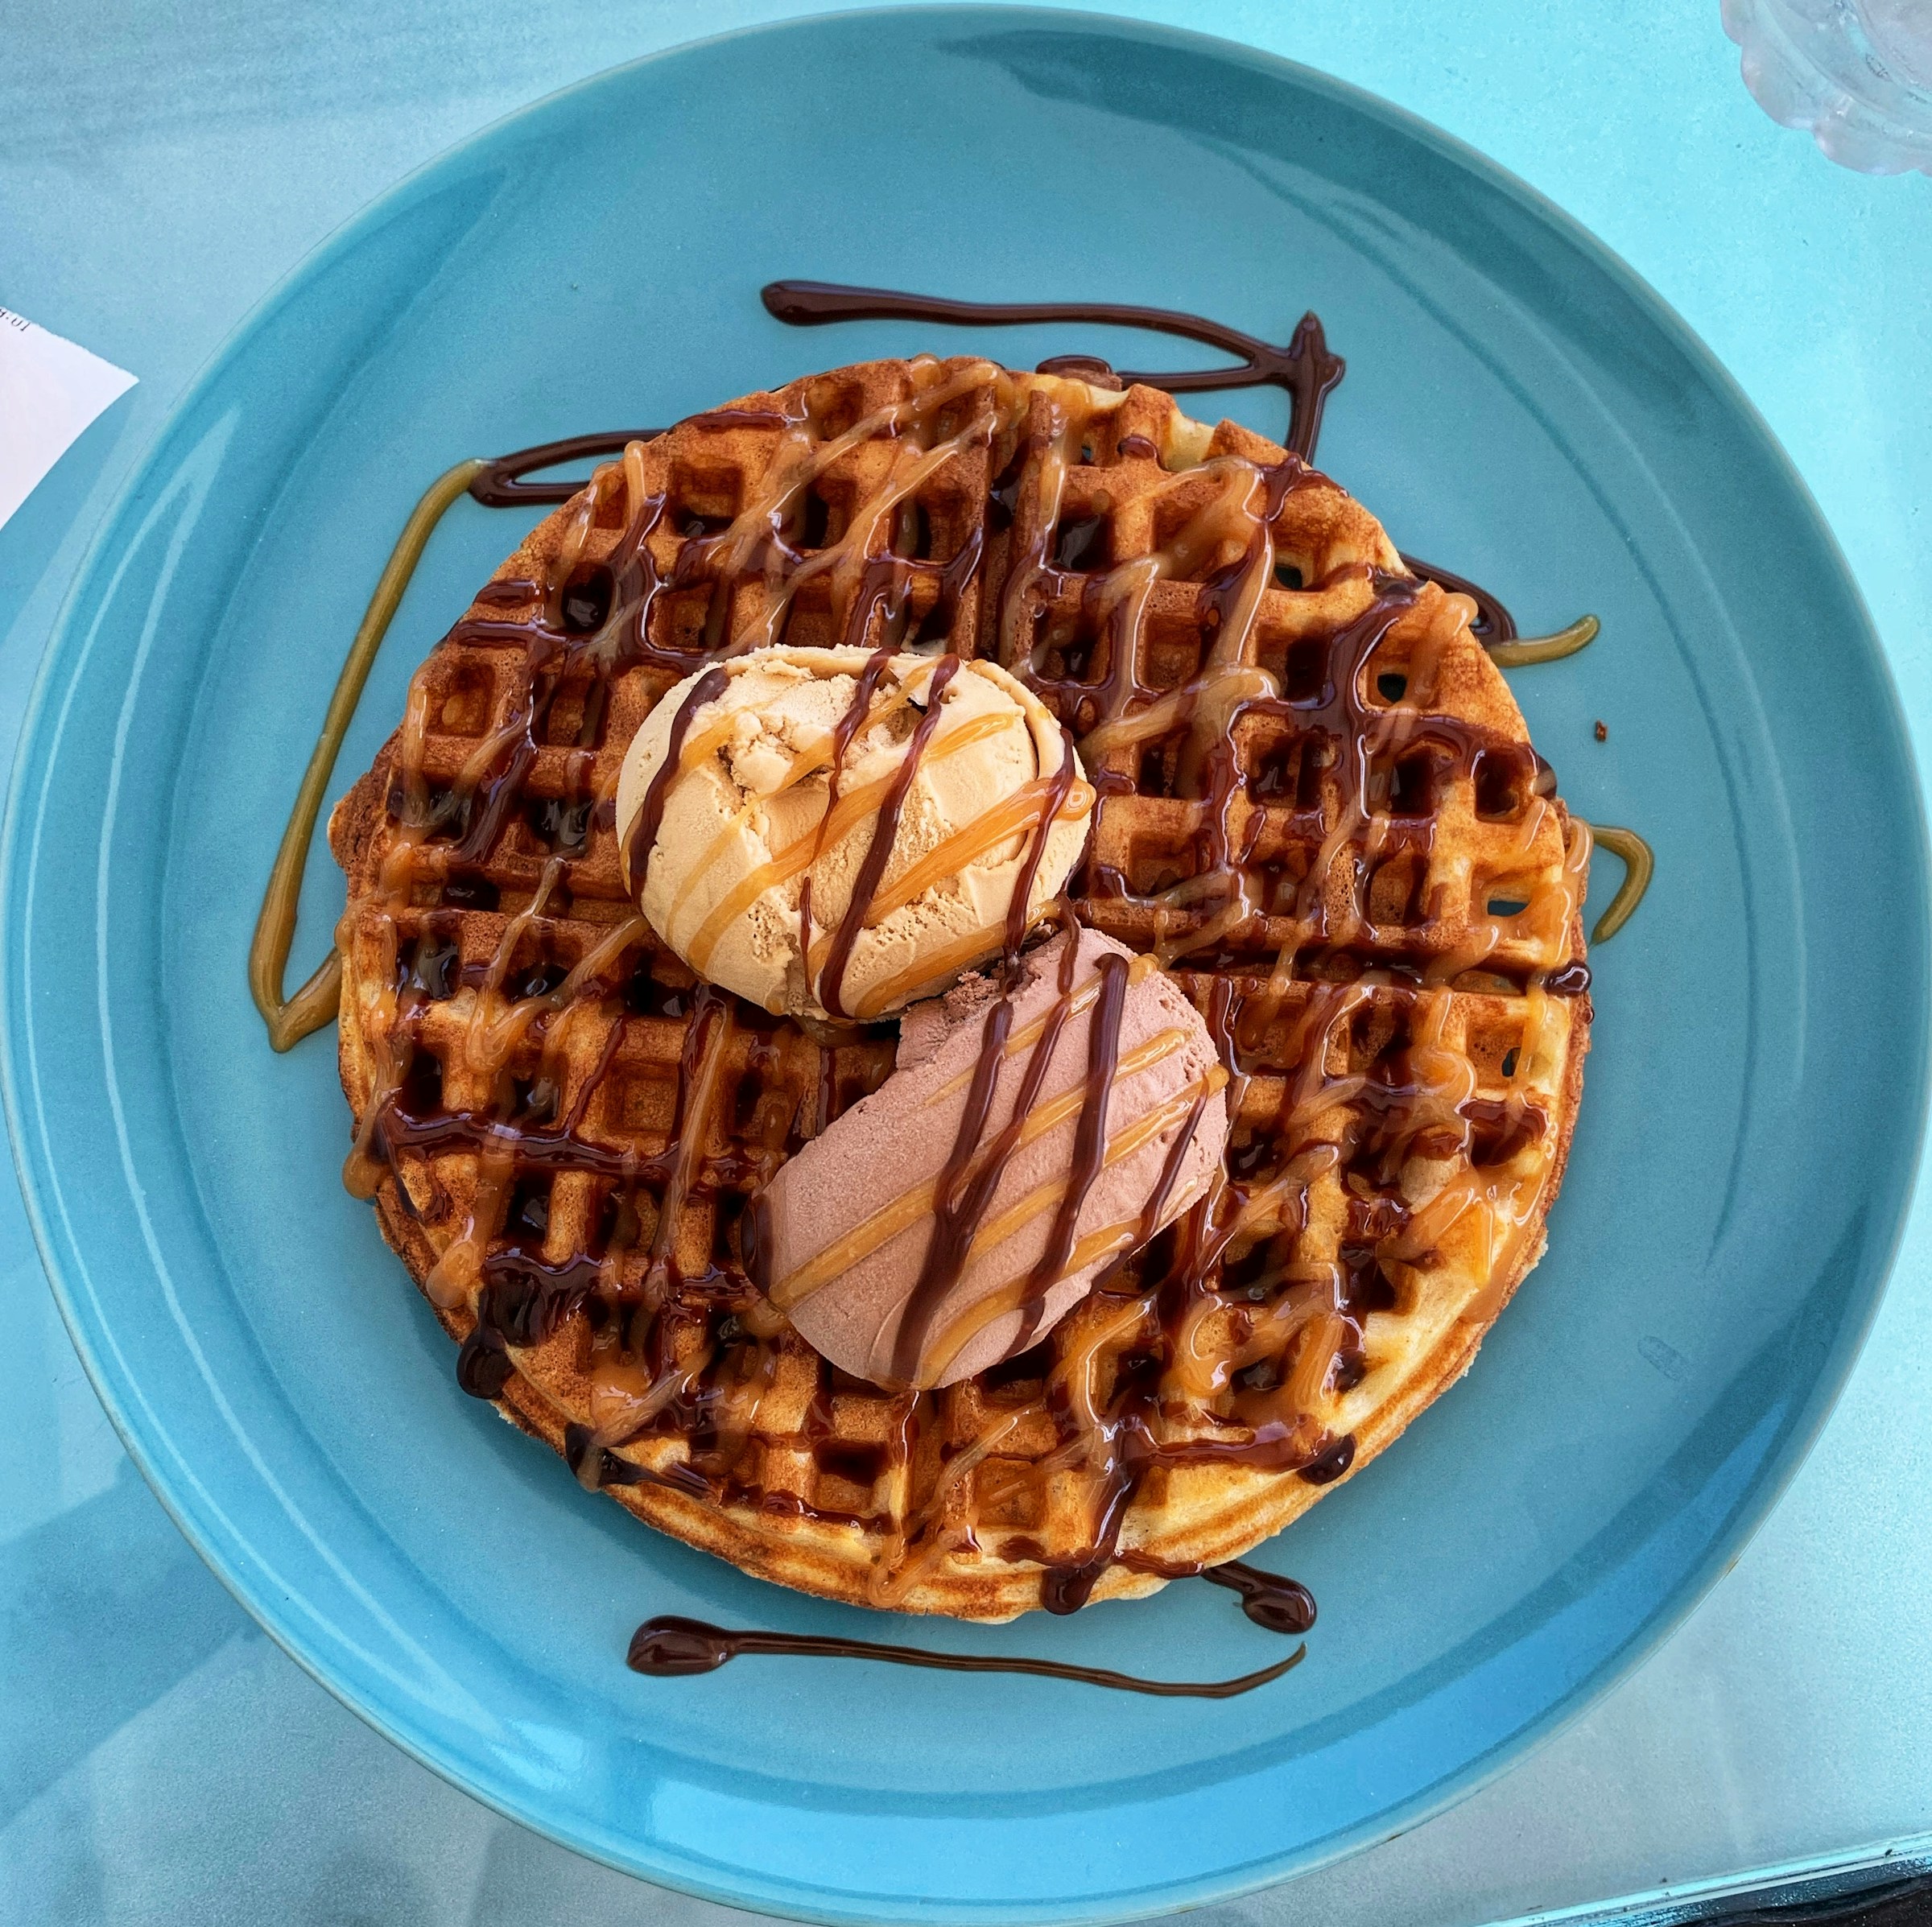 A plate topped with waffles and ice cream | Source: Unsplash